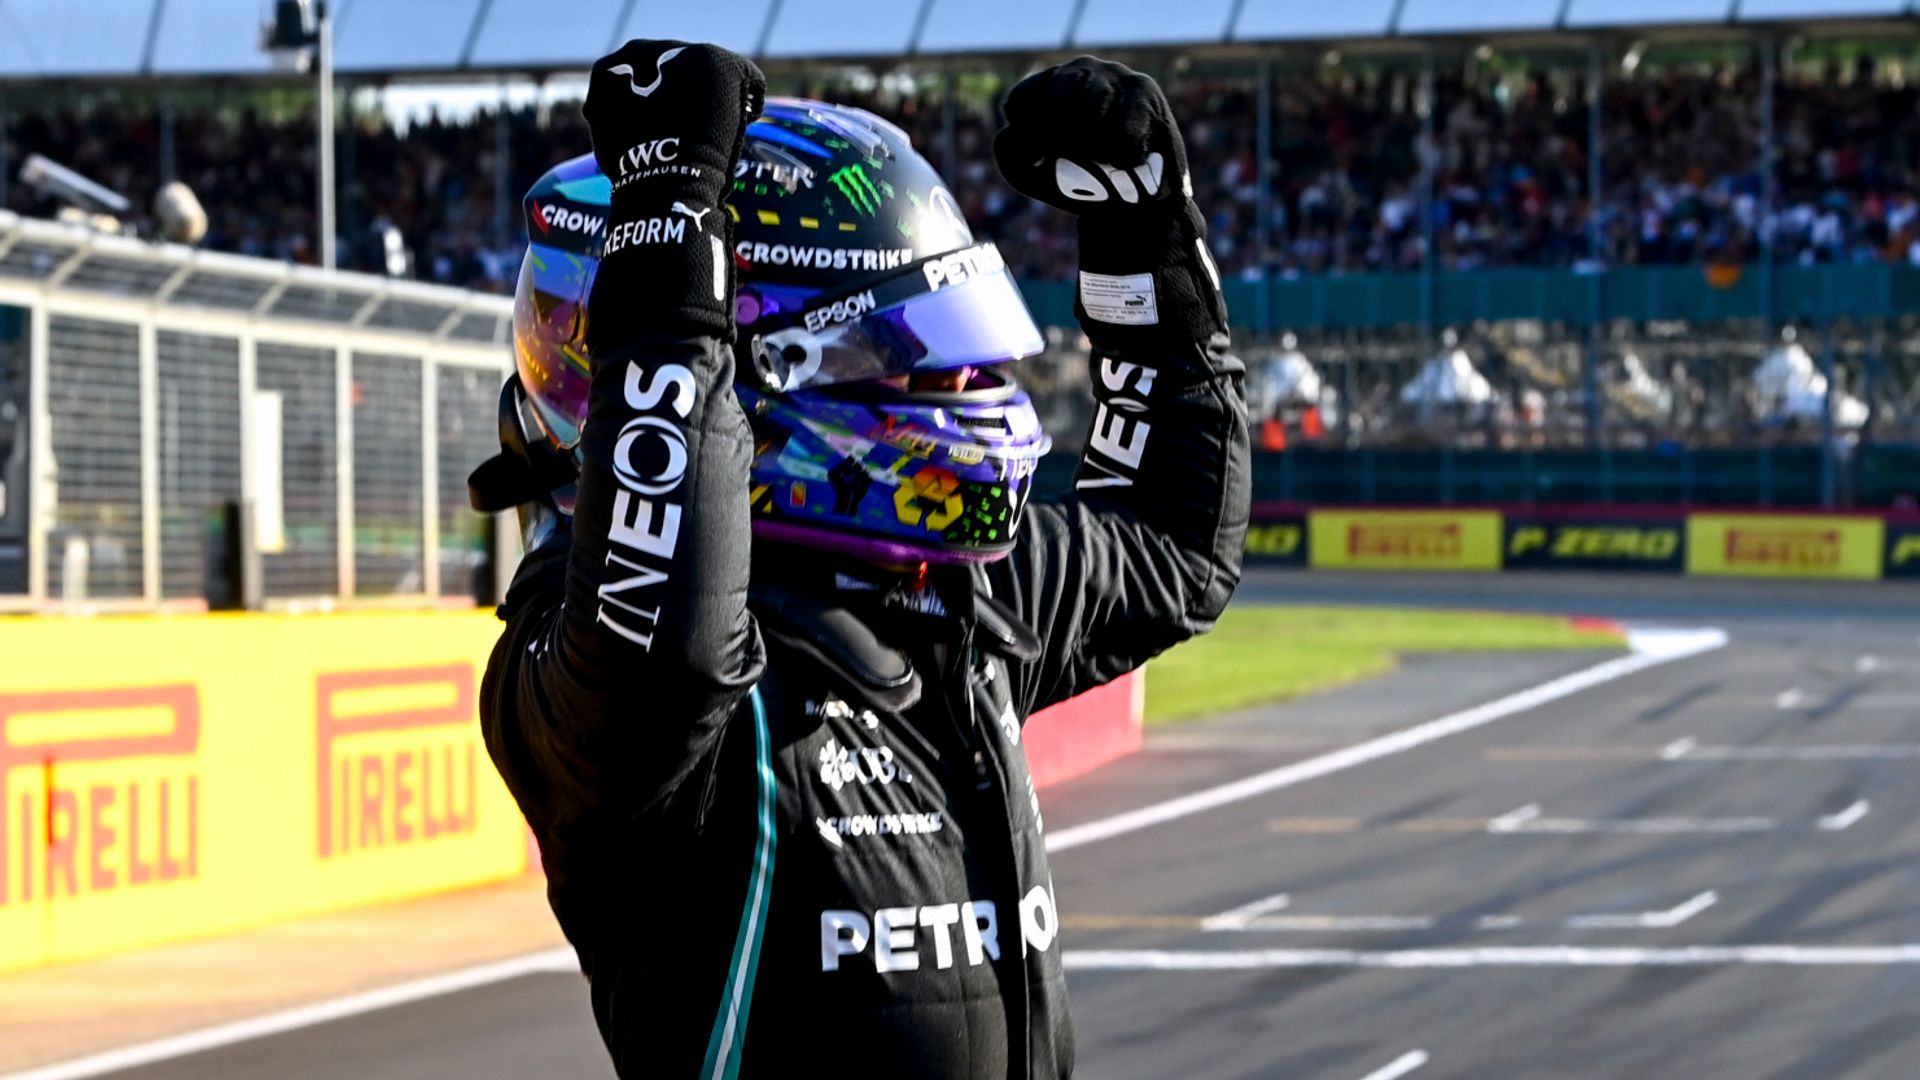 Superb Hamilton beats Verstappen in Qualy for F1 Sprint